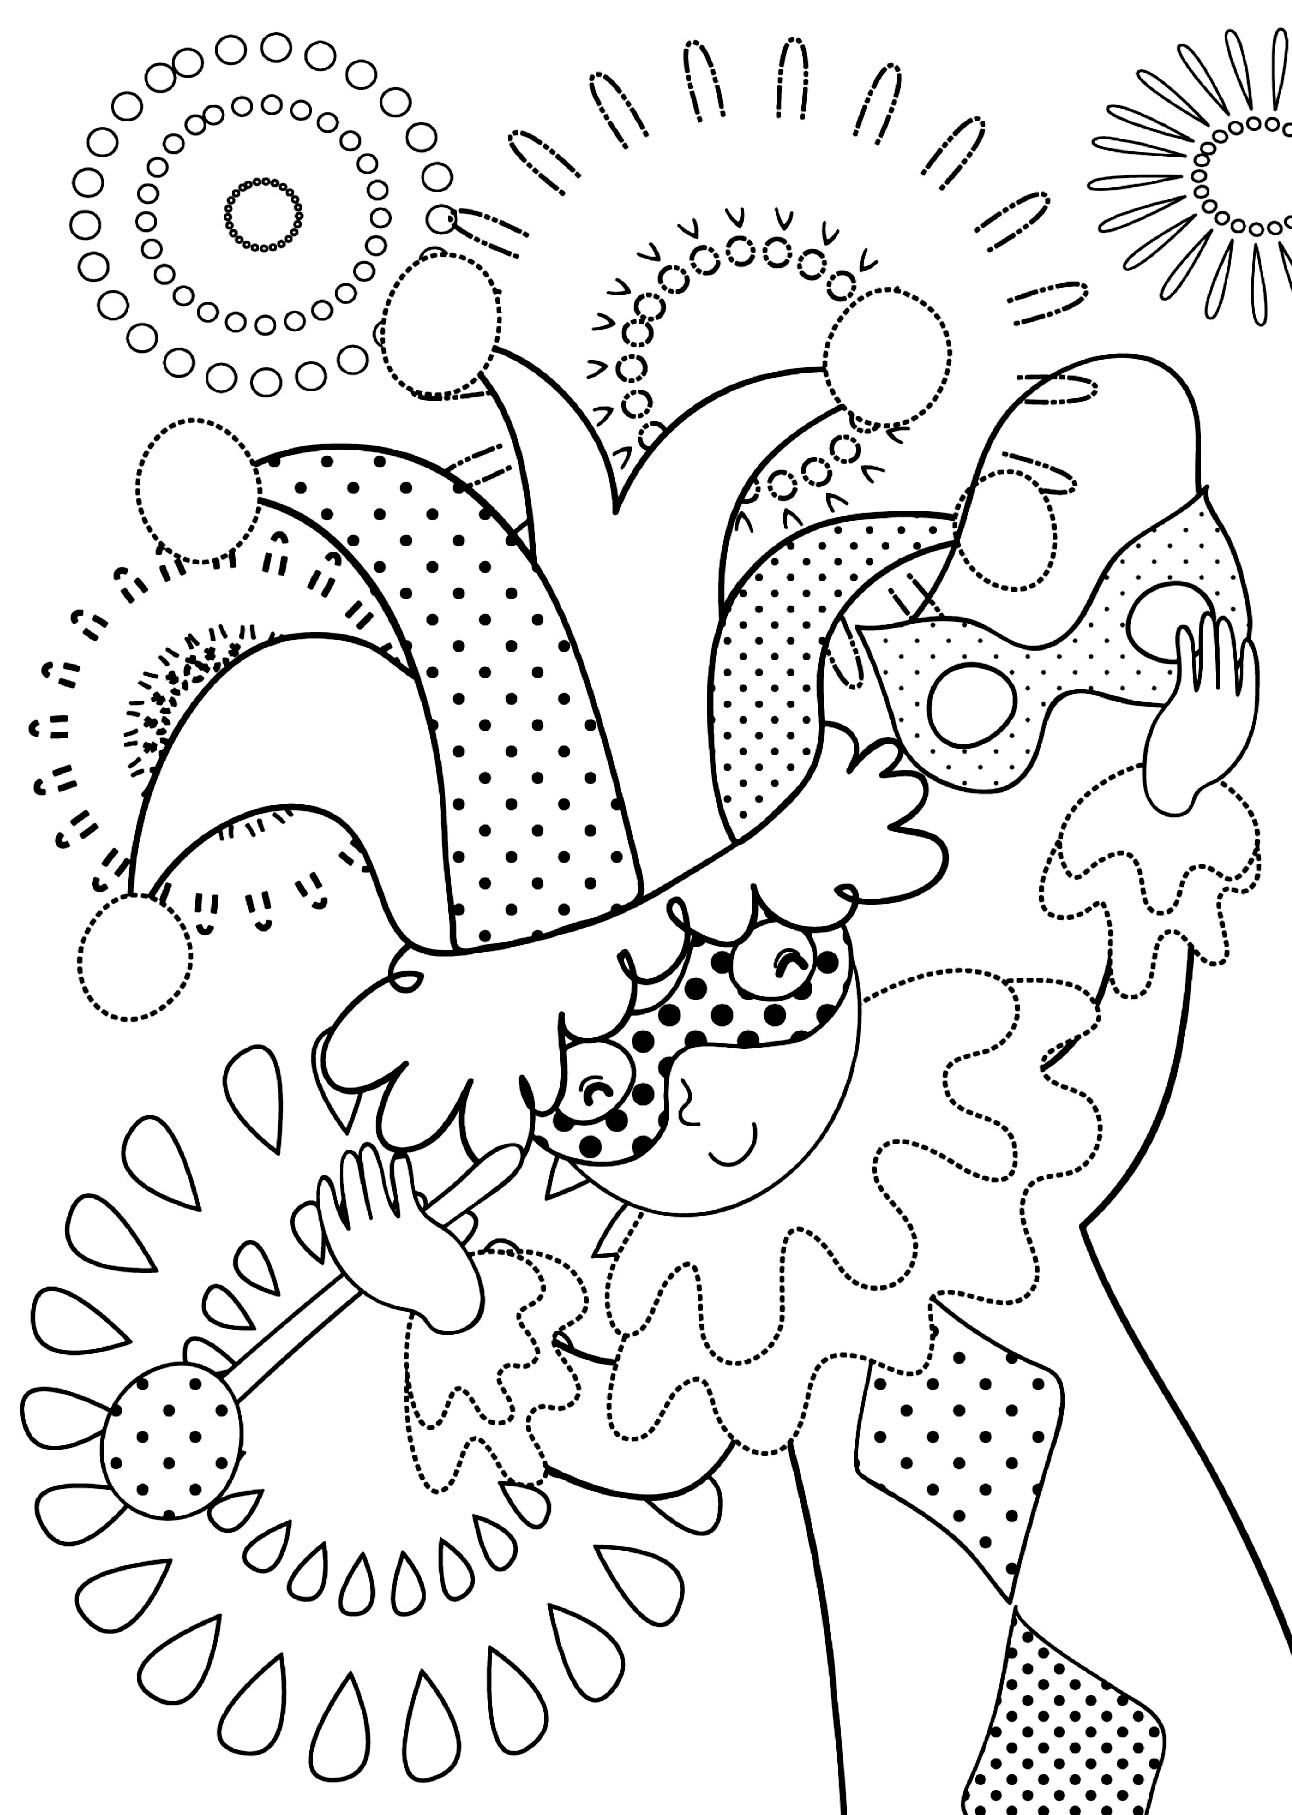 making-masks-coloring-page-carnival-kids-coloring-pages